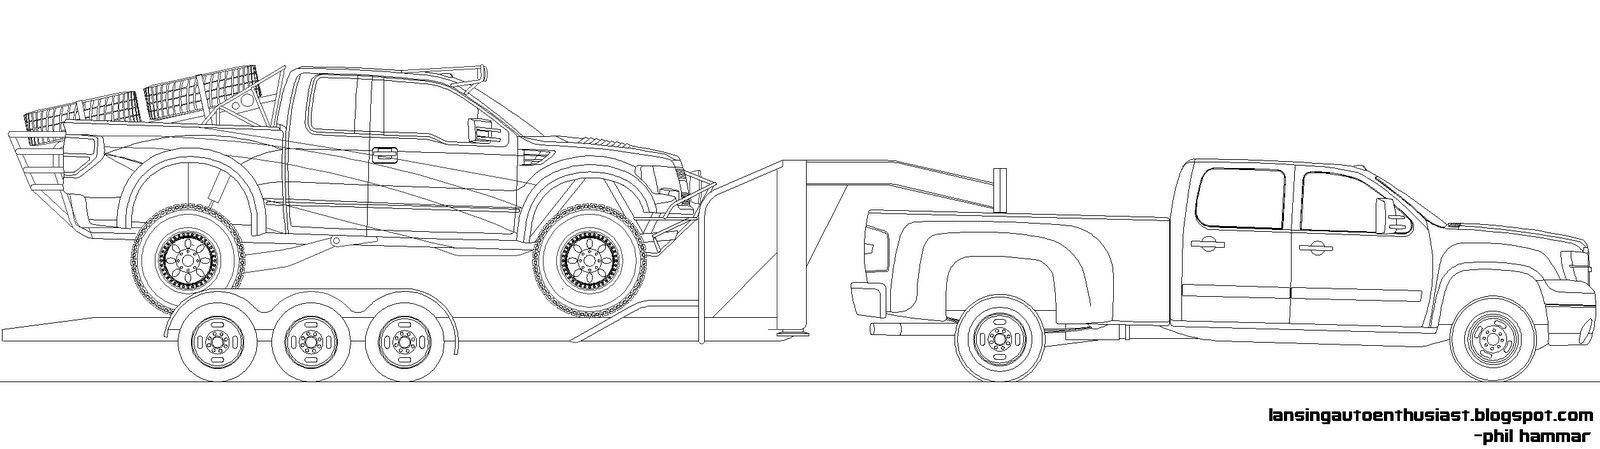 Chevy Diesel Truck Coloring Pages - Ð¡oloring Pages For All Ages